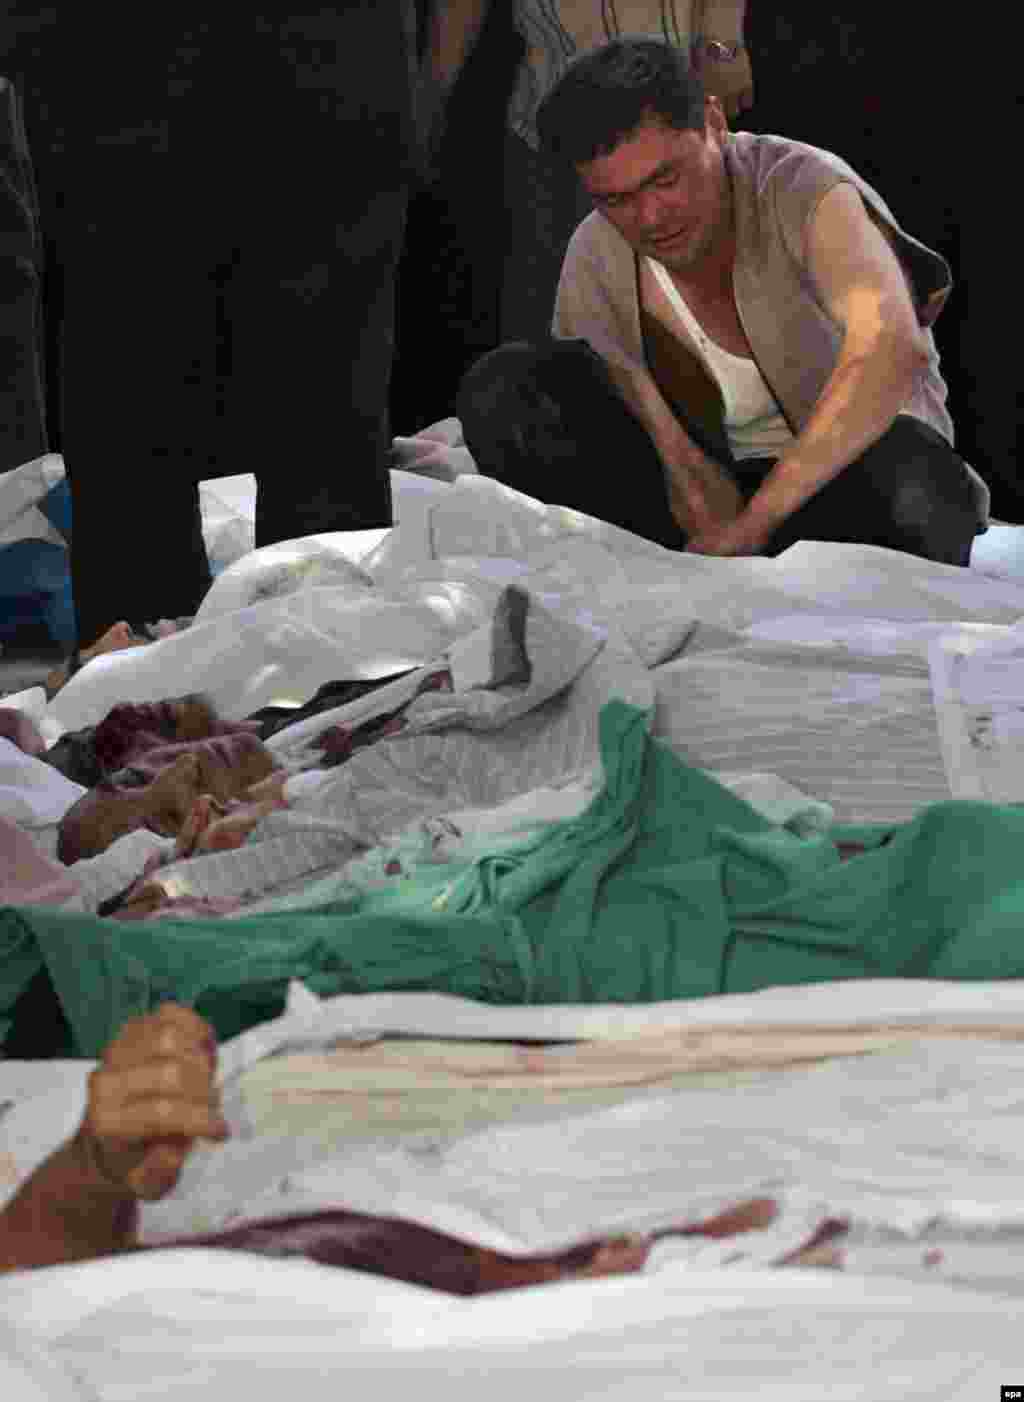 A man tries to identify a relative among the bodies - Early accounts by eyewitnesses and from local rights groups suggested that as many as 1,000 people had died.